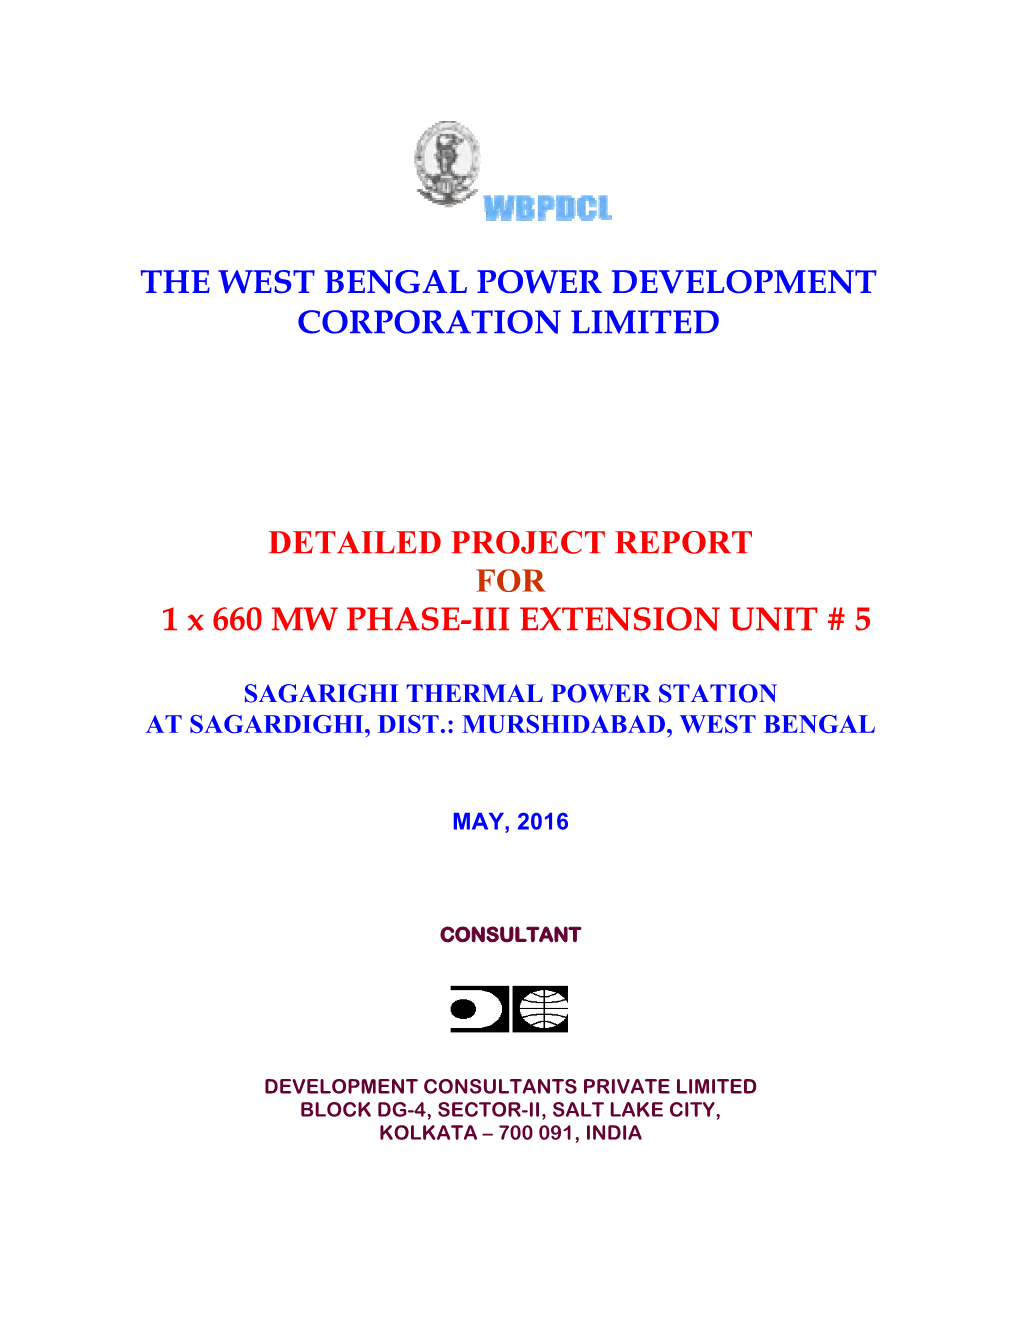 The West Bengal Power Development Corporation Limited